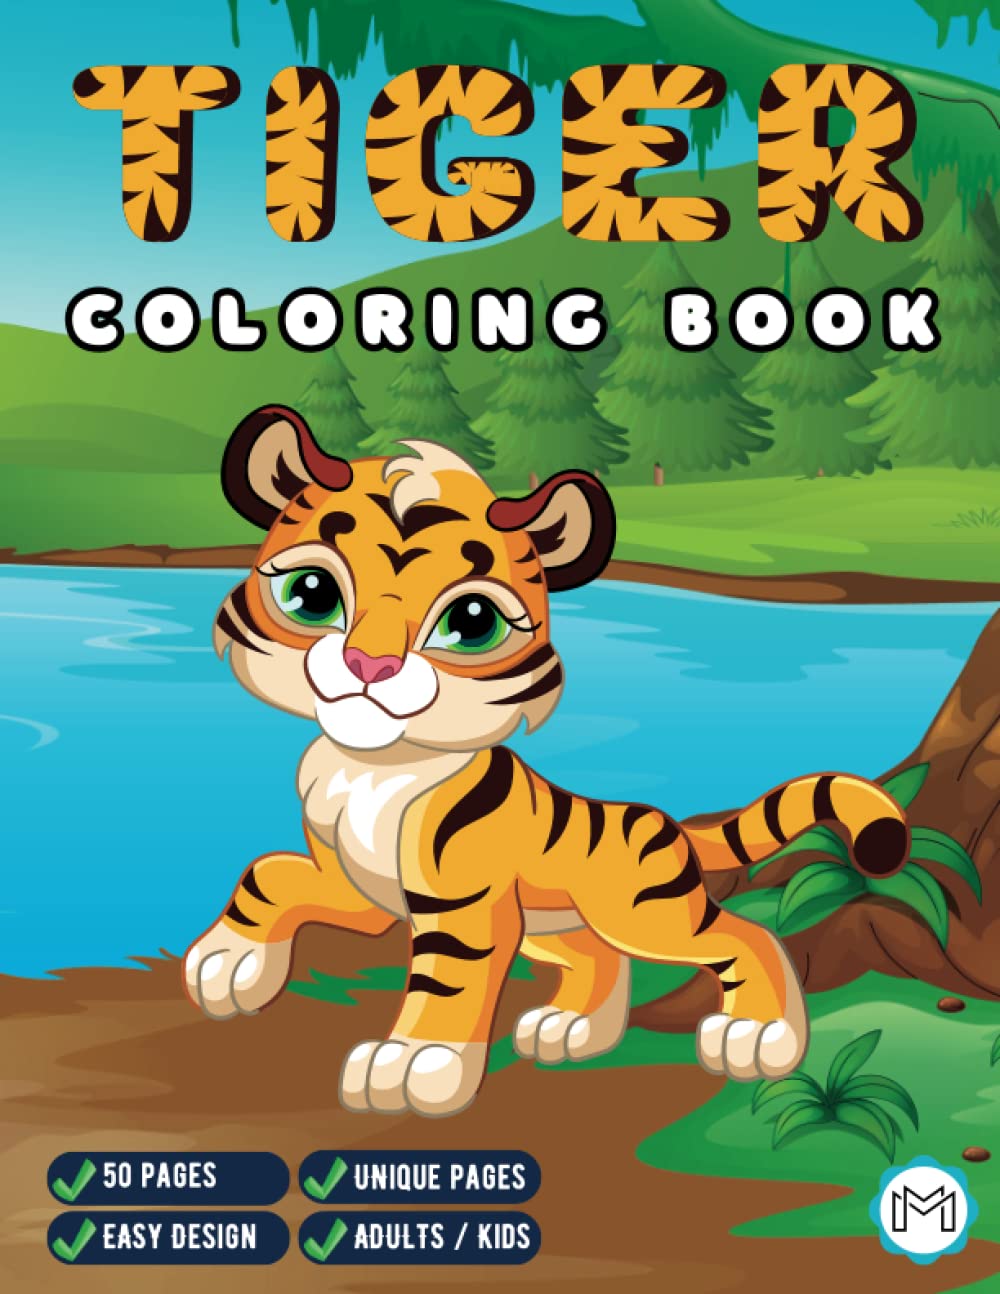 Coloring Books For Kids Ages 8-12 : Baby Cute Animals Design and